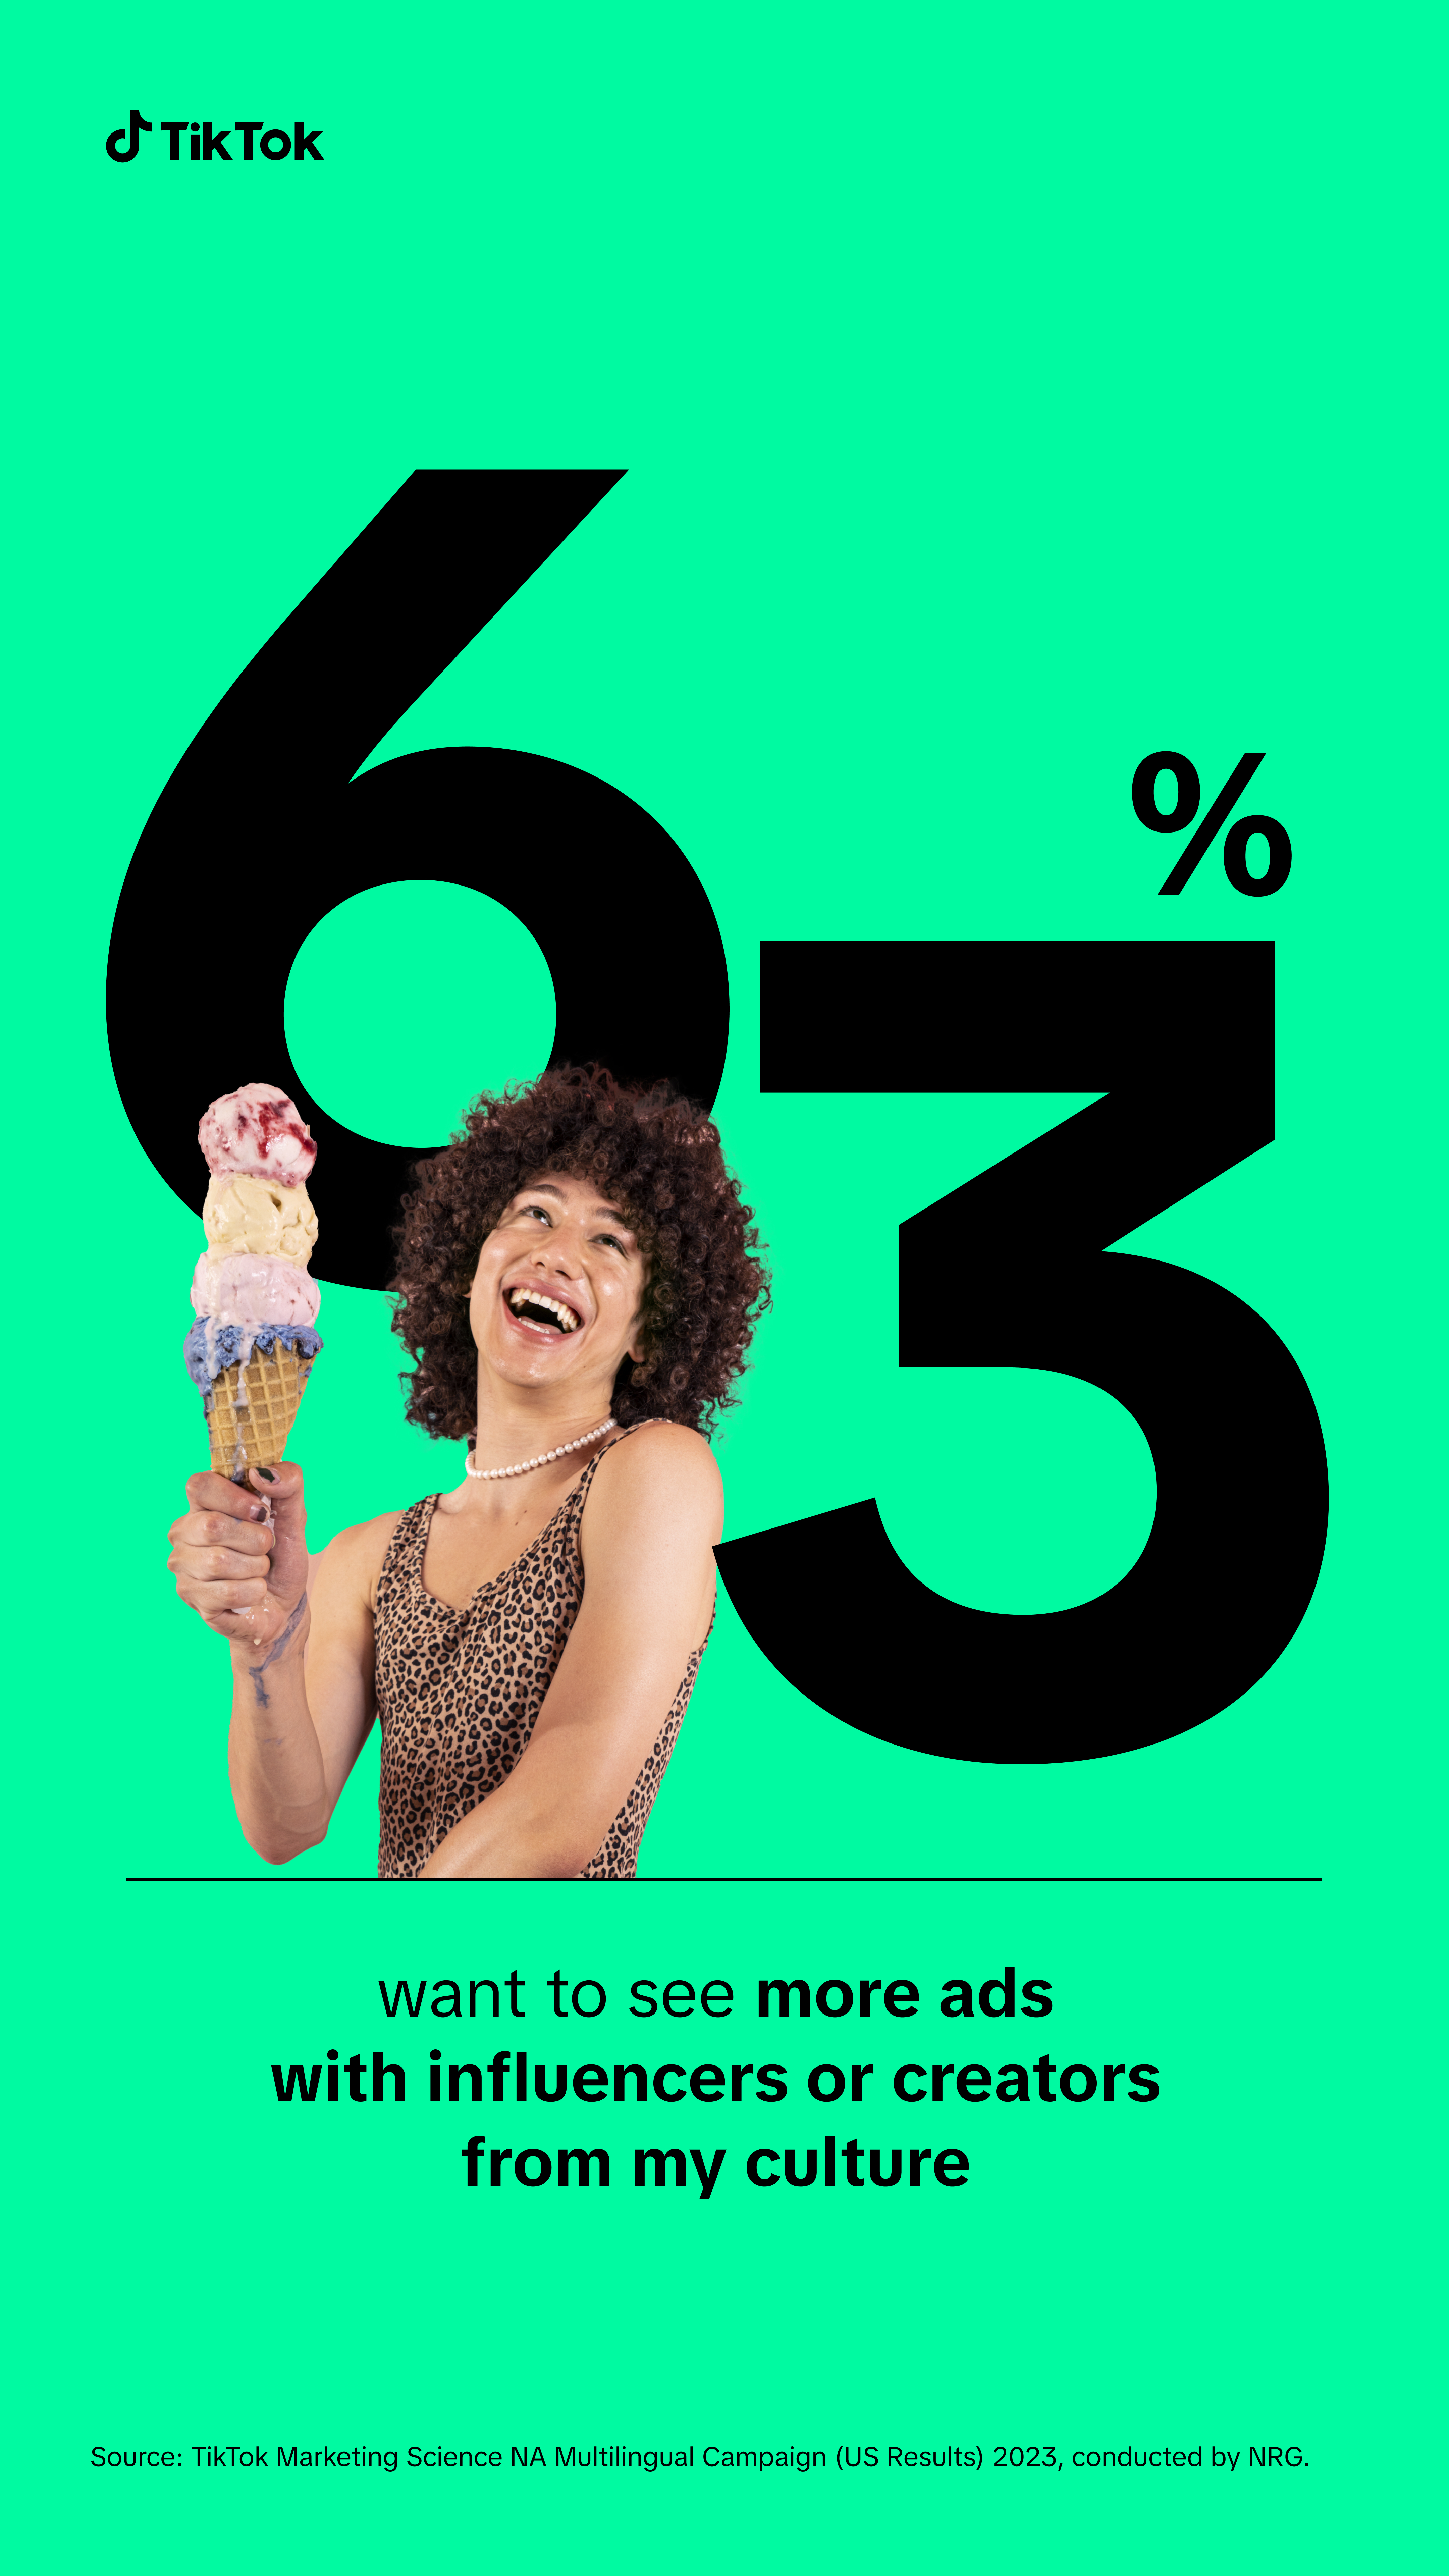 63% of bilingual users want to see more ads with influencers or creators from their culture